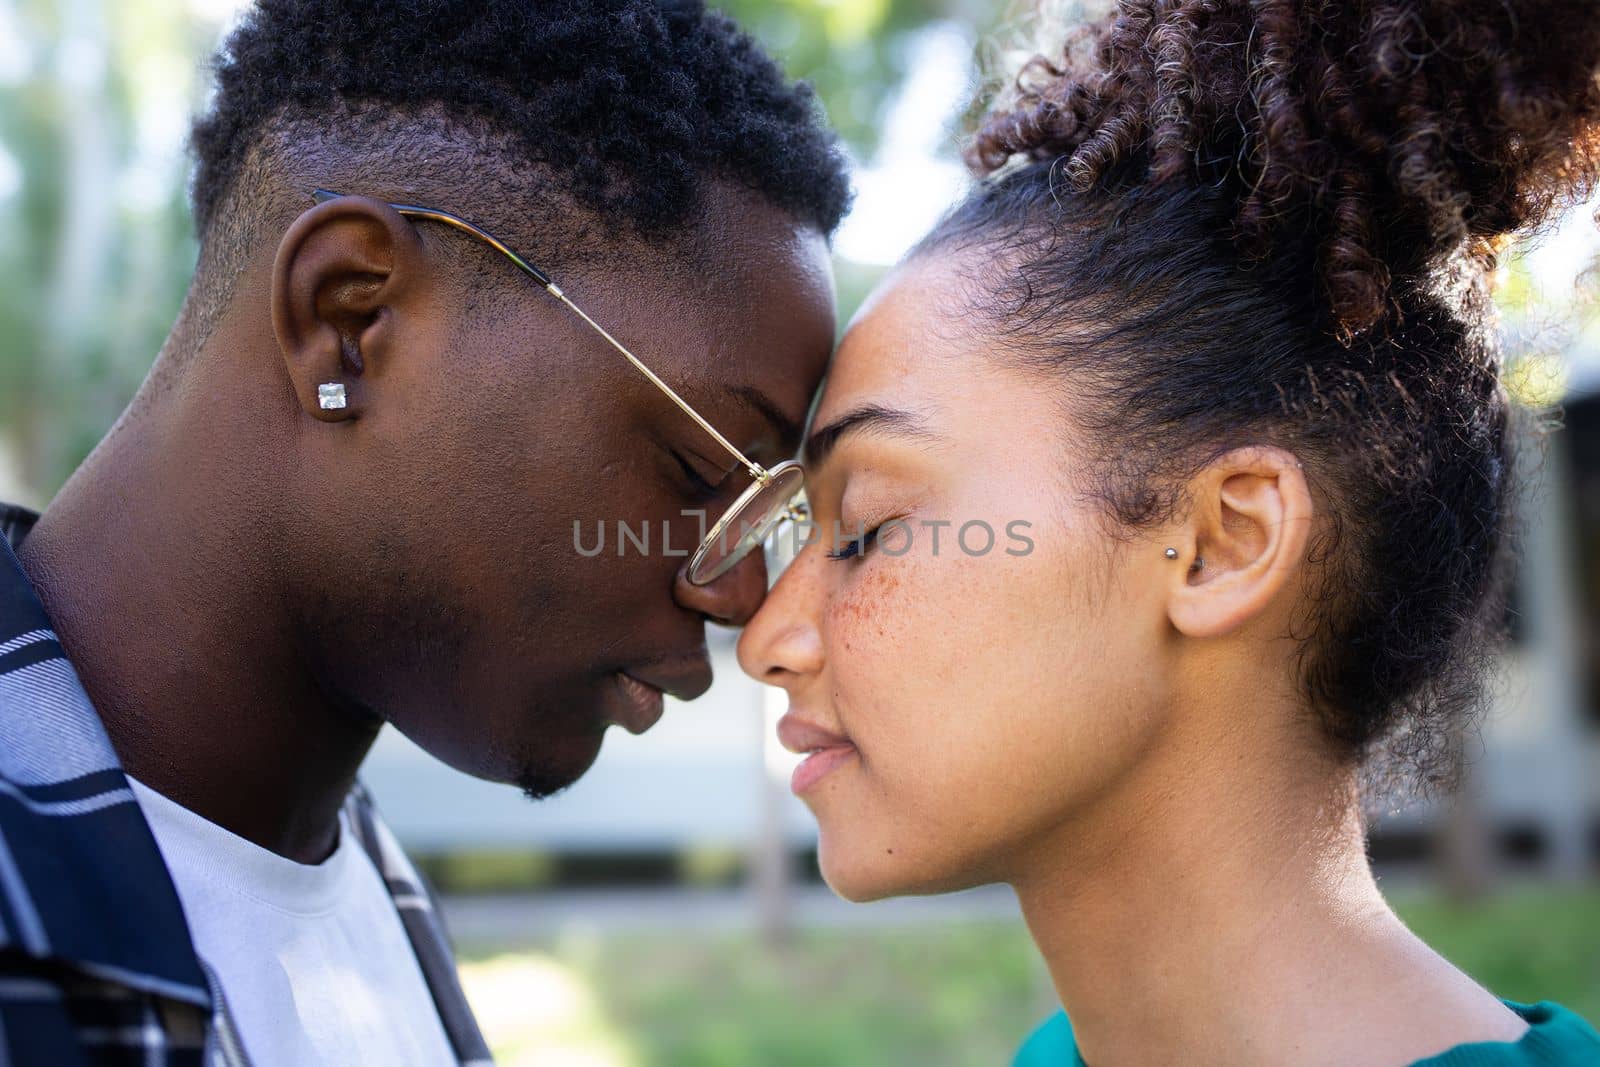 Young African American loving couple tenderly touching foreheads, sharing a romantic, intimate, affectionate moment. Relationship.